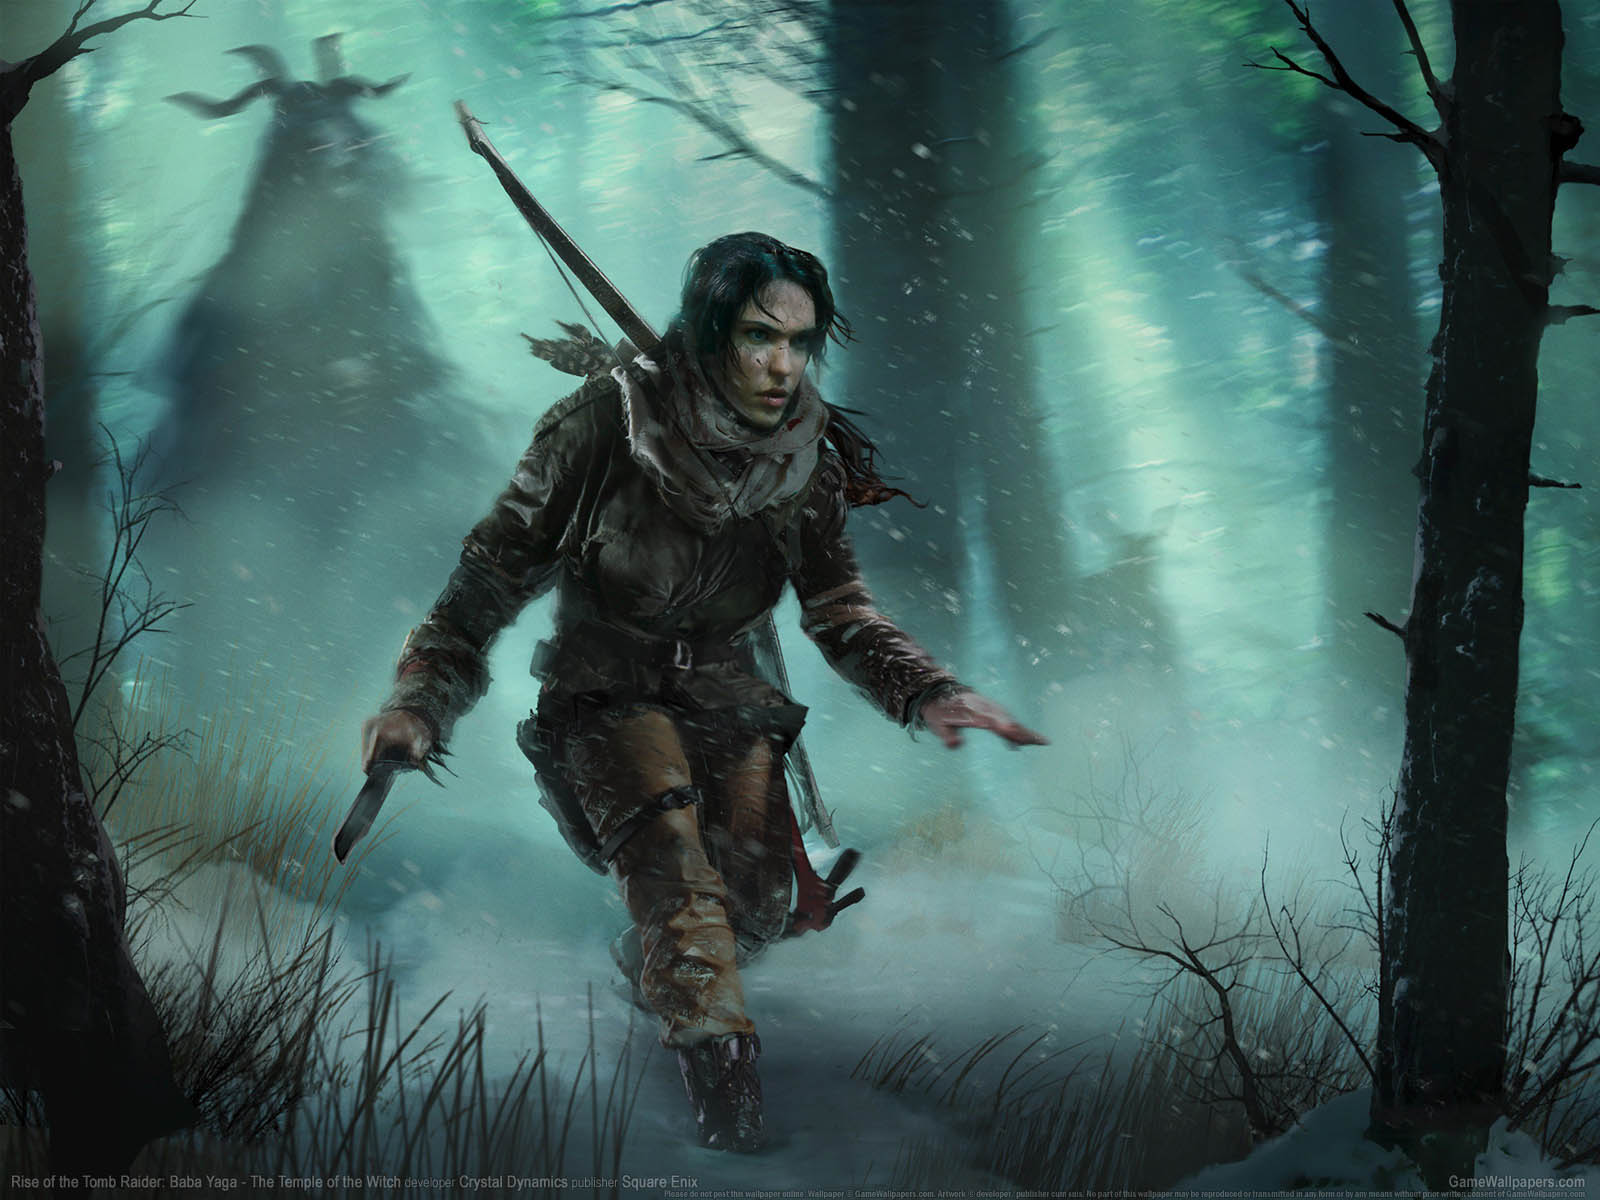 Rise of the Tomb Raider: Baba Yaga - The Temple of the Witch wallpaper 01 1600x1200